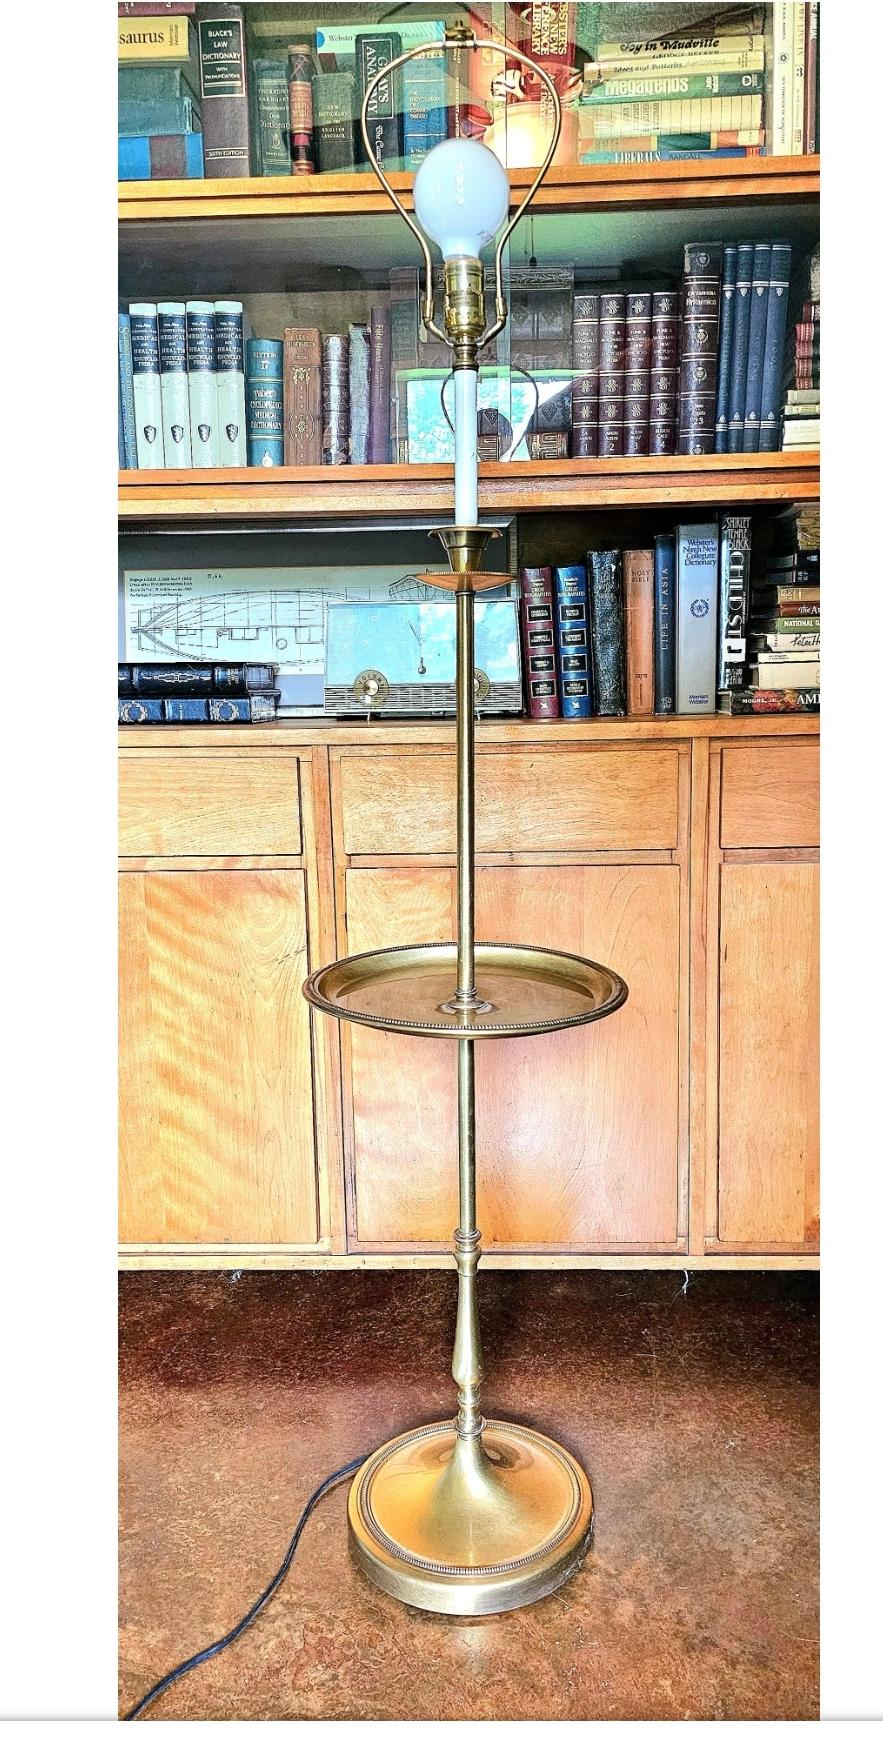 Born in Chicago 
1960s Frederick Cooper brass table floor lamp.
Classic mid century styling.
Table is functional and holds weight.
No shade included
Hollywood regency 
Art deco